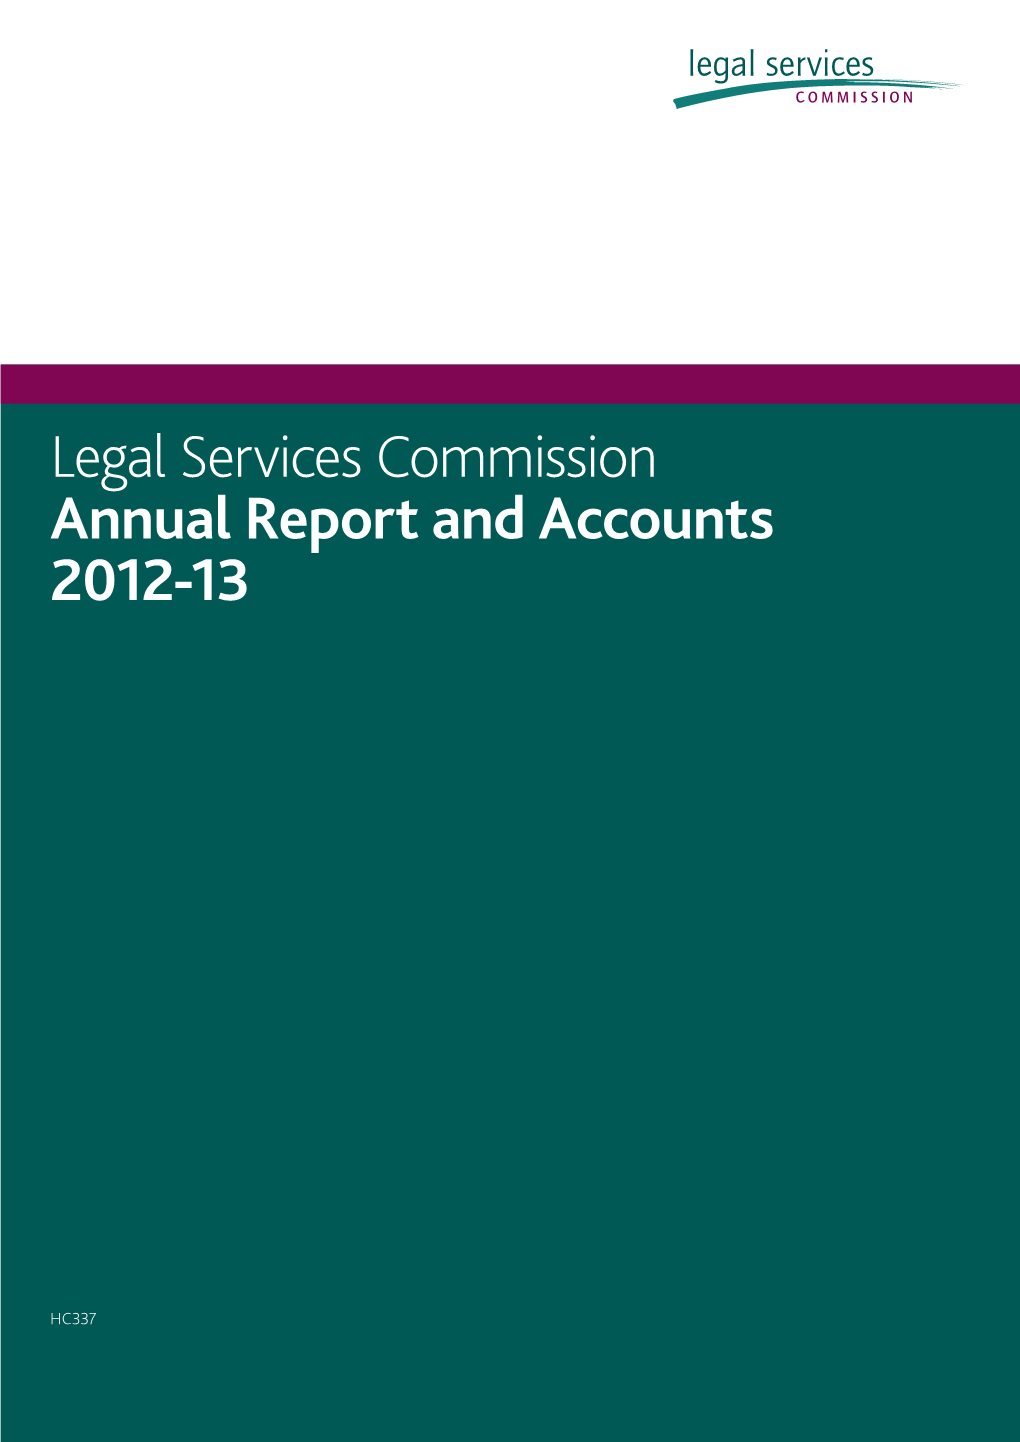 Legal Services Commission Annual Report and Accounts 2012-13